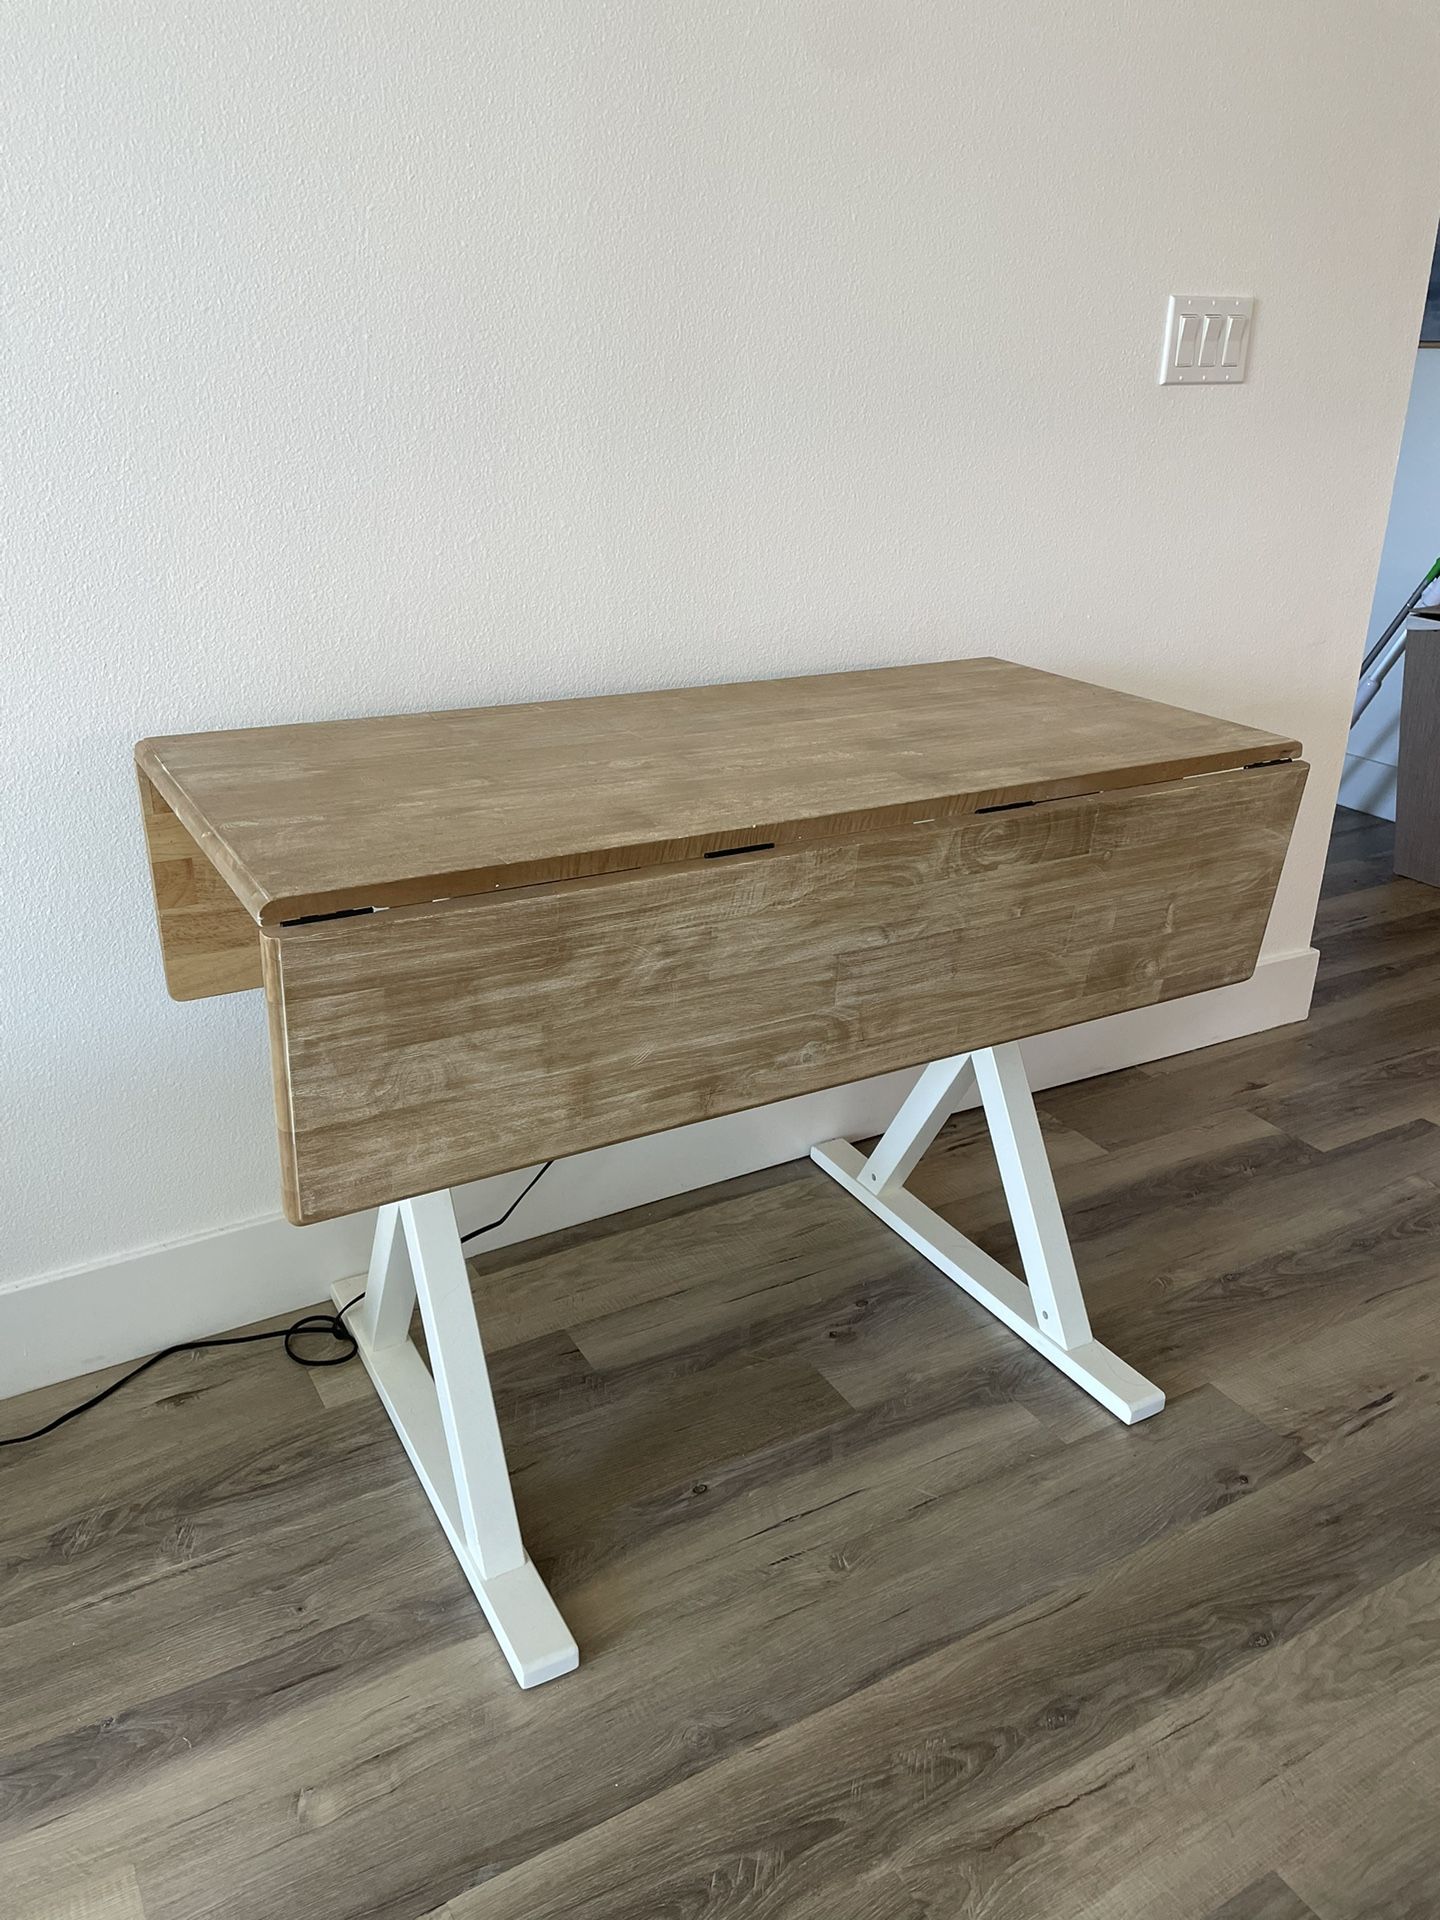 Foldable kitchen table